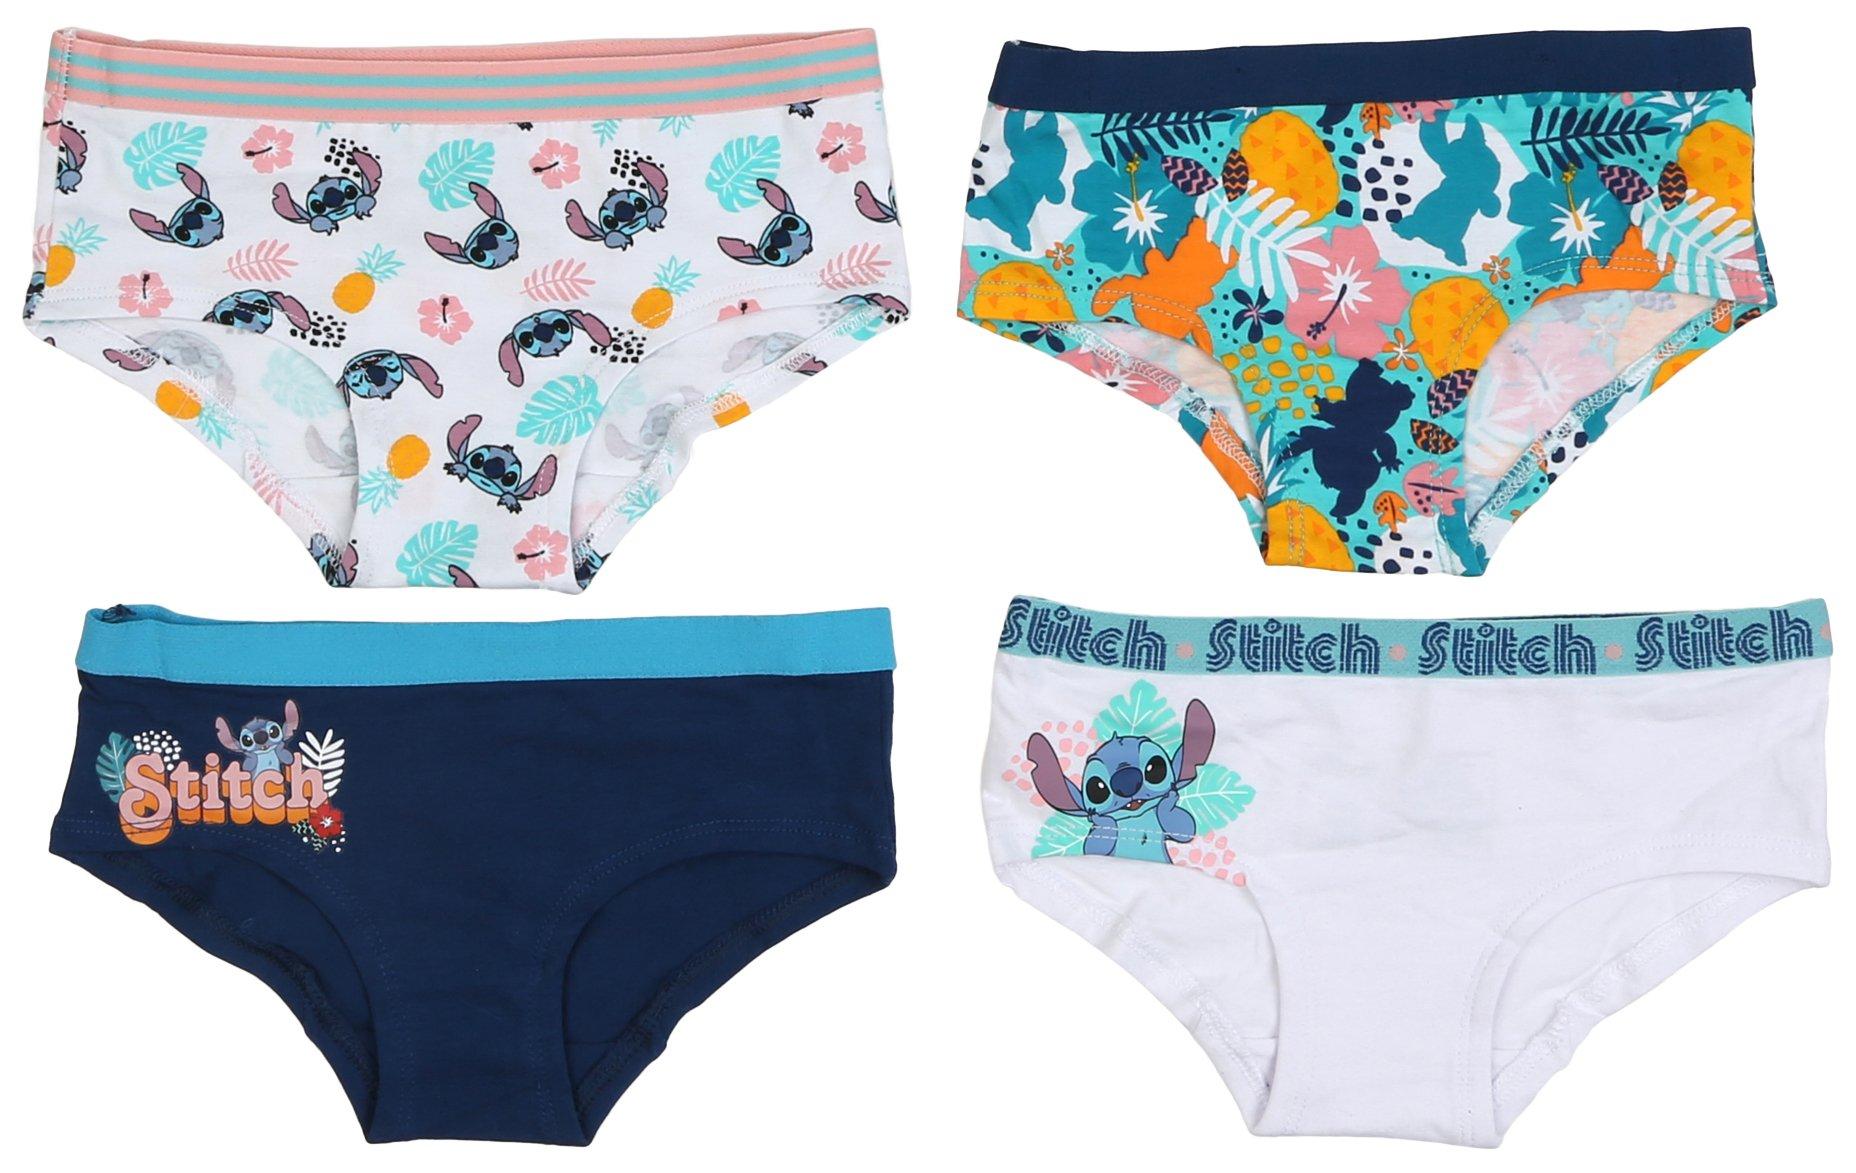 Orchestra Set of 3 Stitch Disney panties for girls Print - 2 years